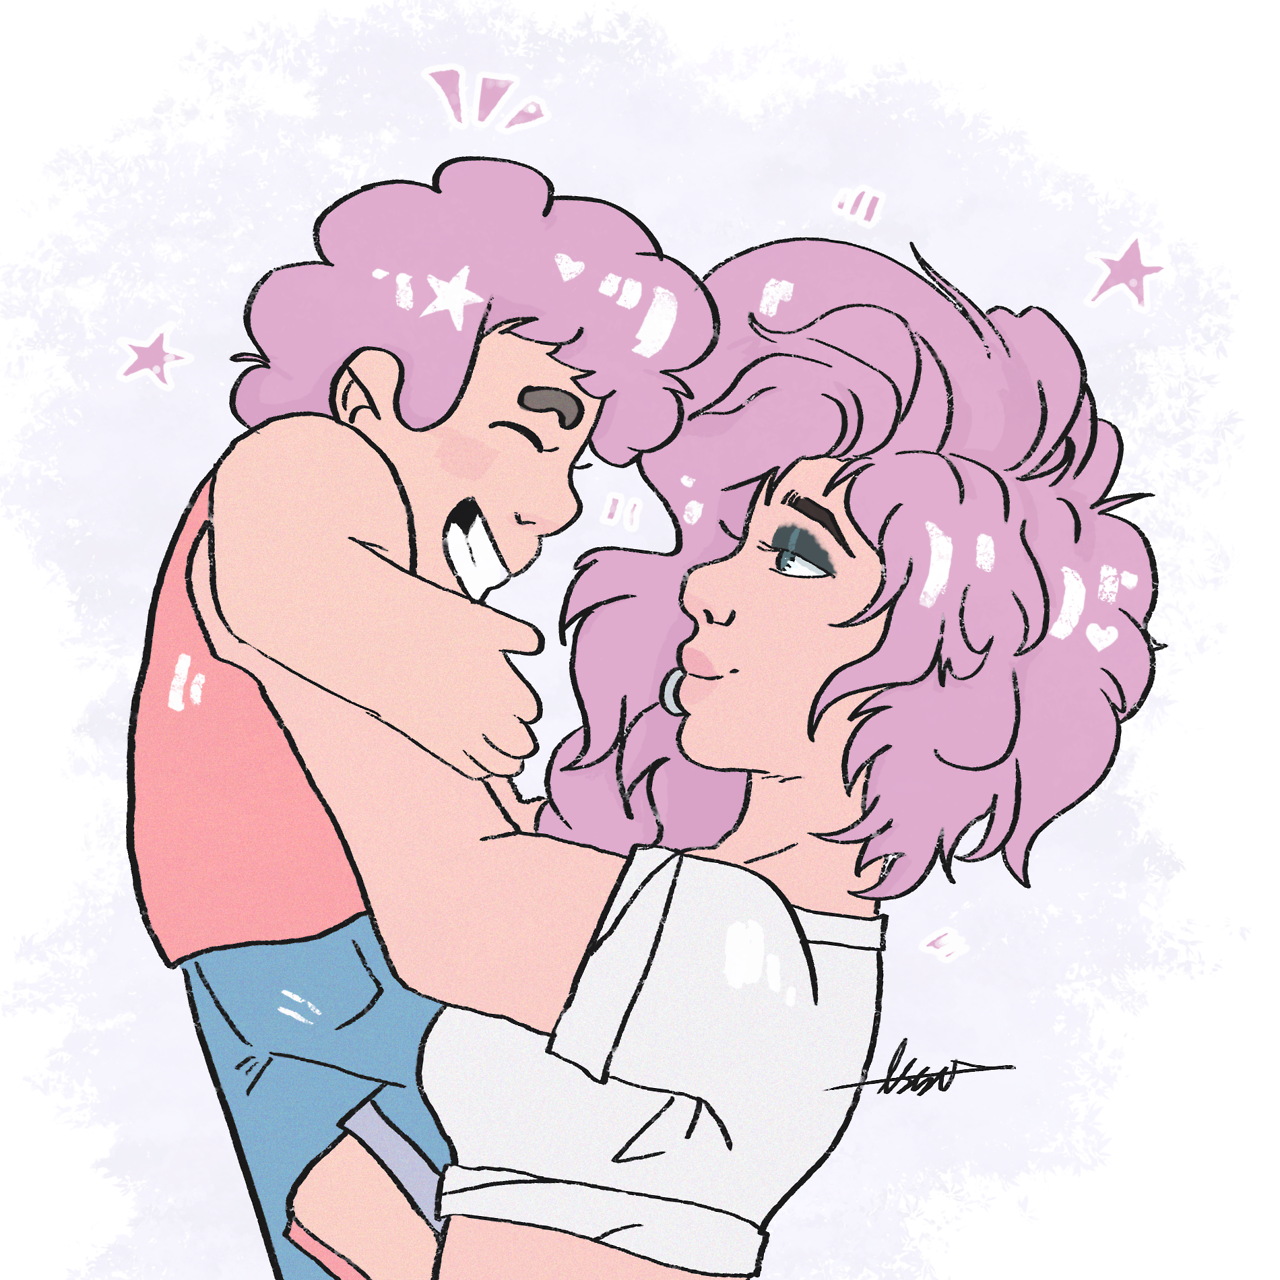 Steven said he wanted pink hair, and I know just the gal to dye it! (non-permanently of course) Just another quick warmup/cool down drawing :p